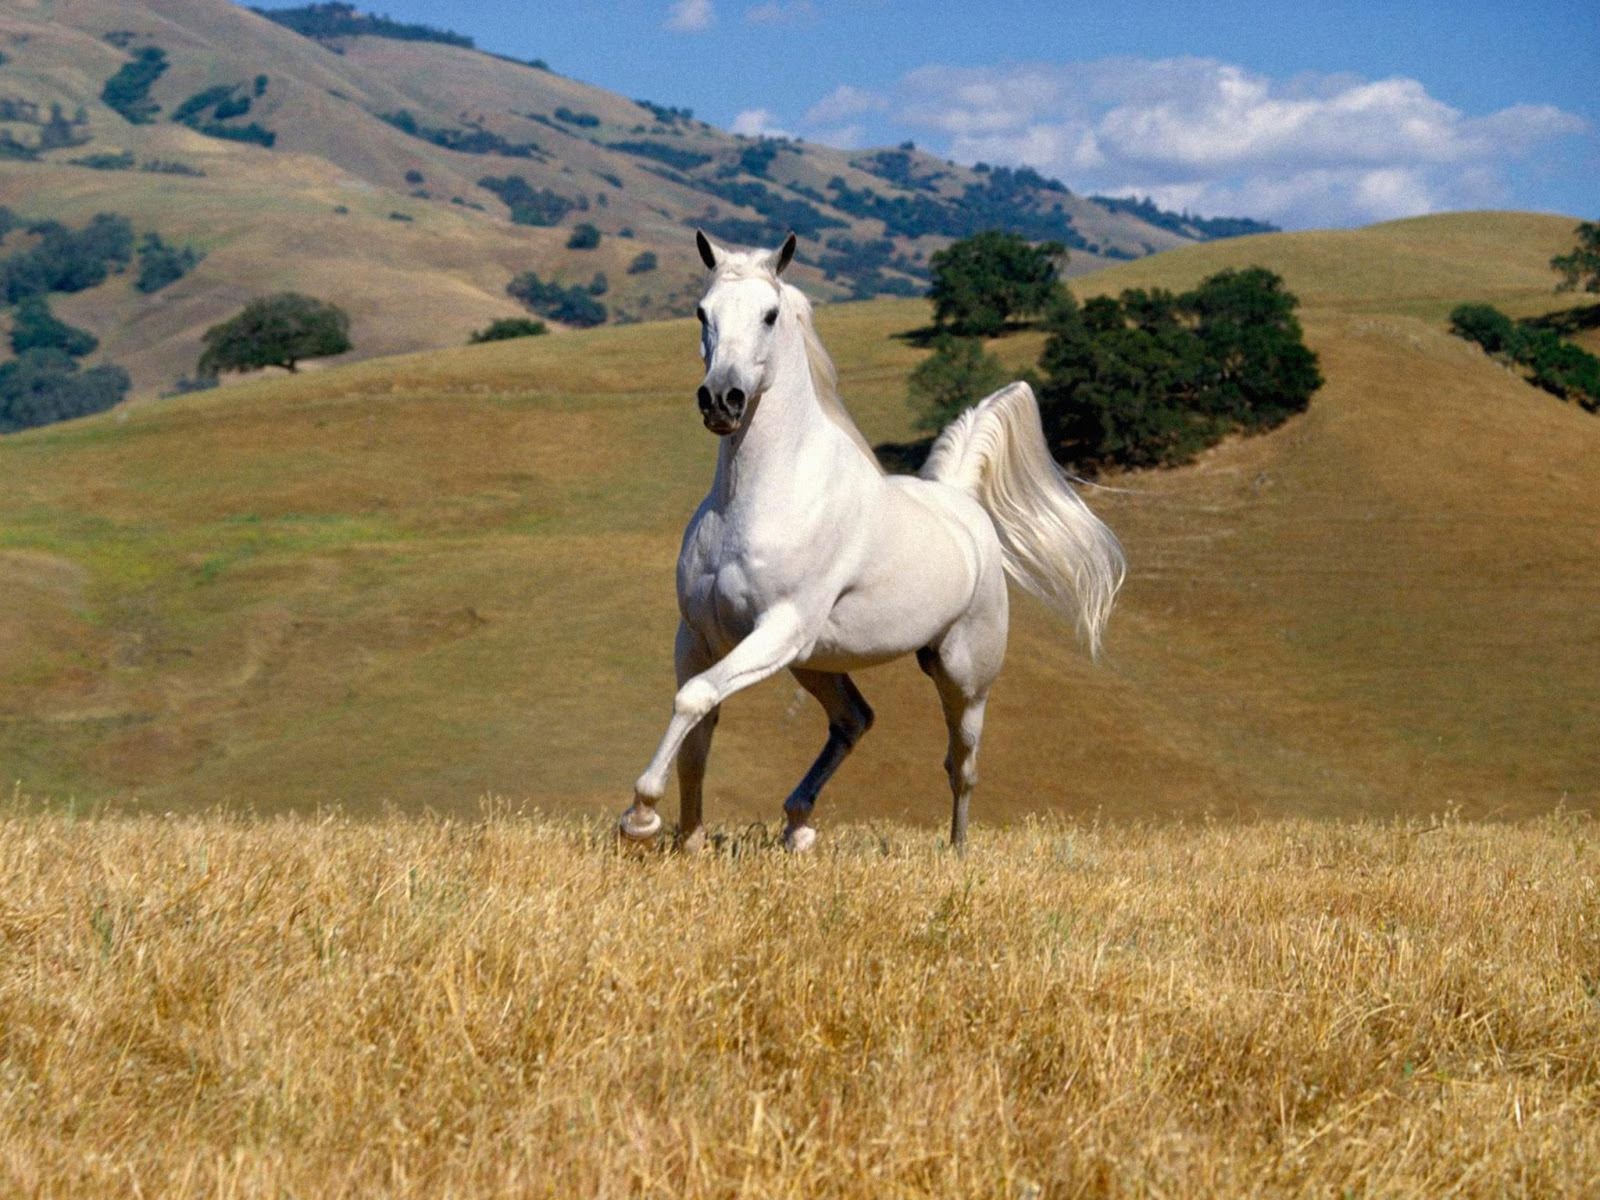 HD Wallpapers Fine horse animal 2013 high resolution hd